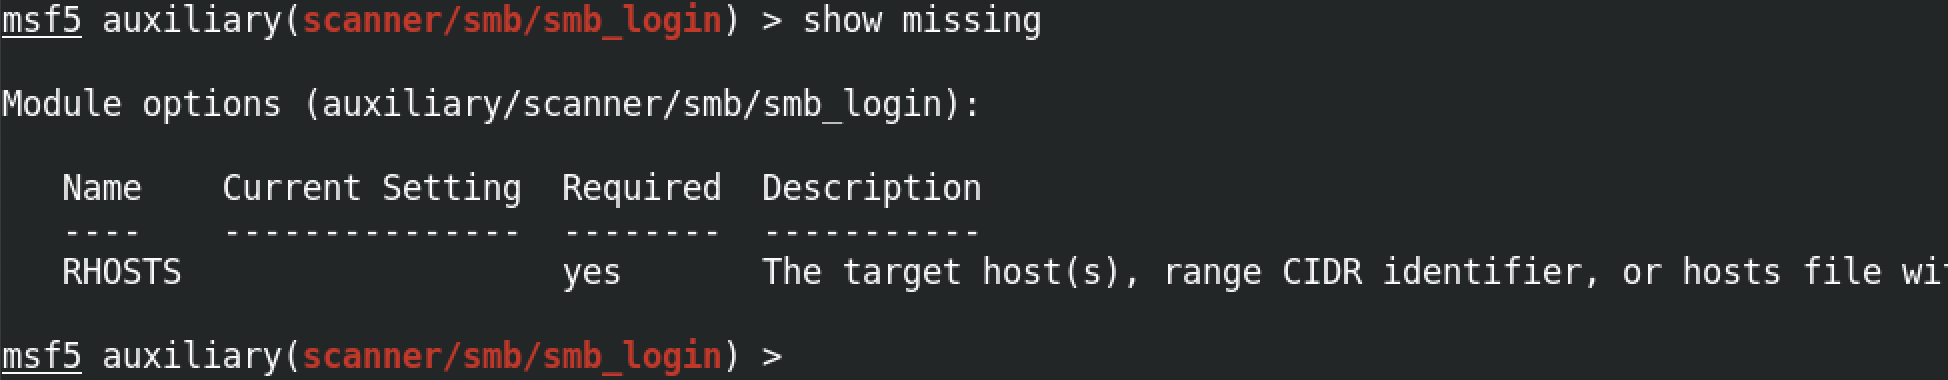 show missing command in metasploit.